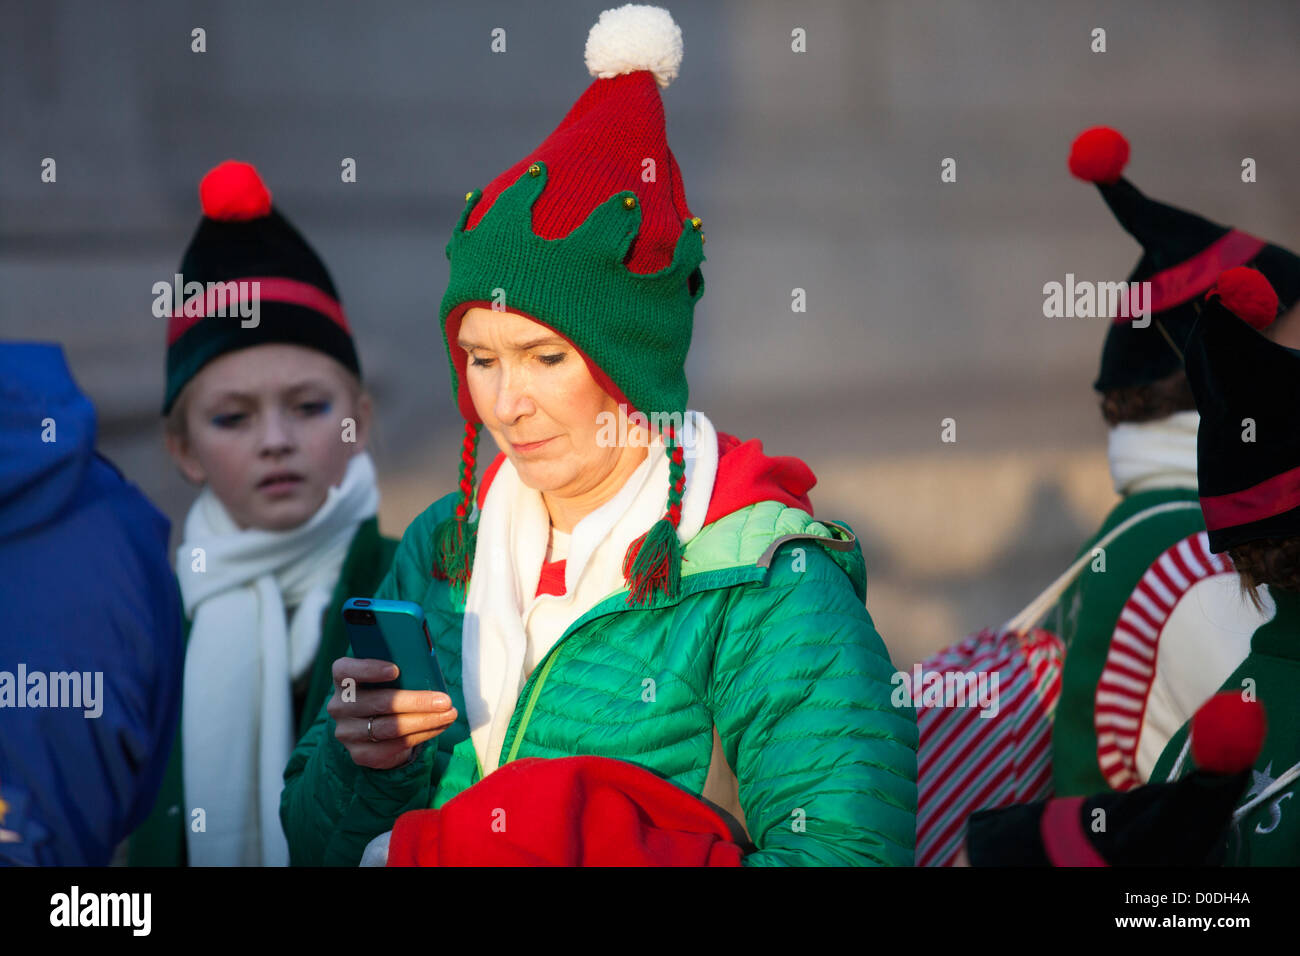 A costumed character checks her cell phone while waiting for the start of Macy's Thanksgiving day parade in New York City, on Thursday, Nov. 22, 2012. Stock Photo